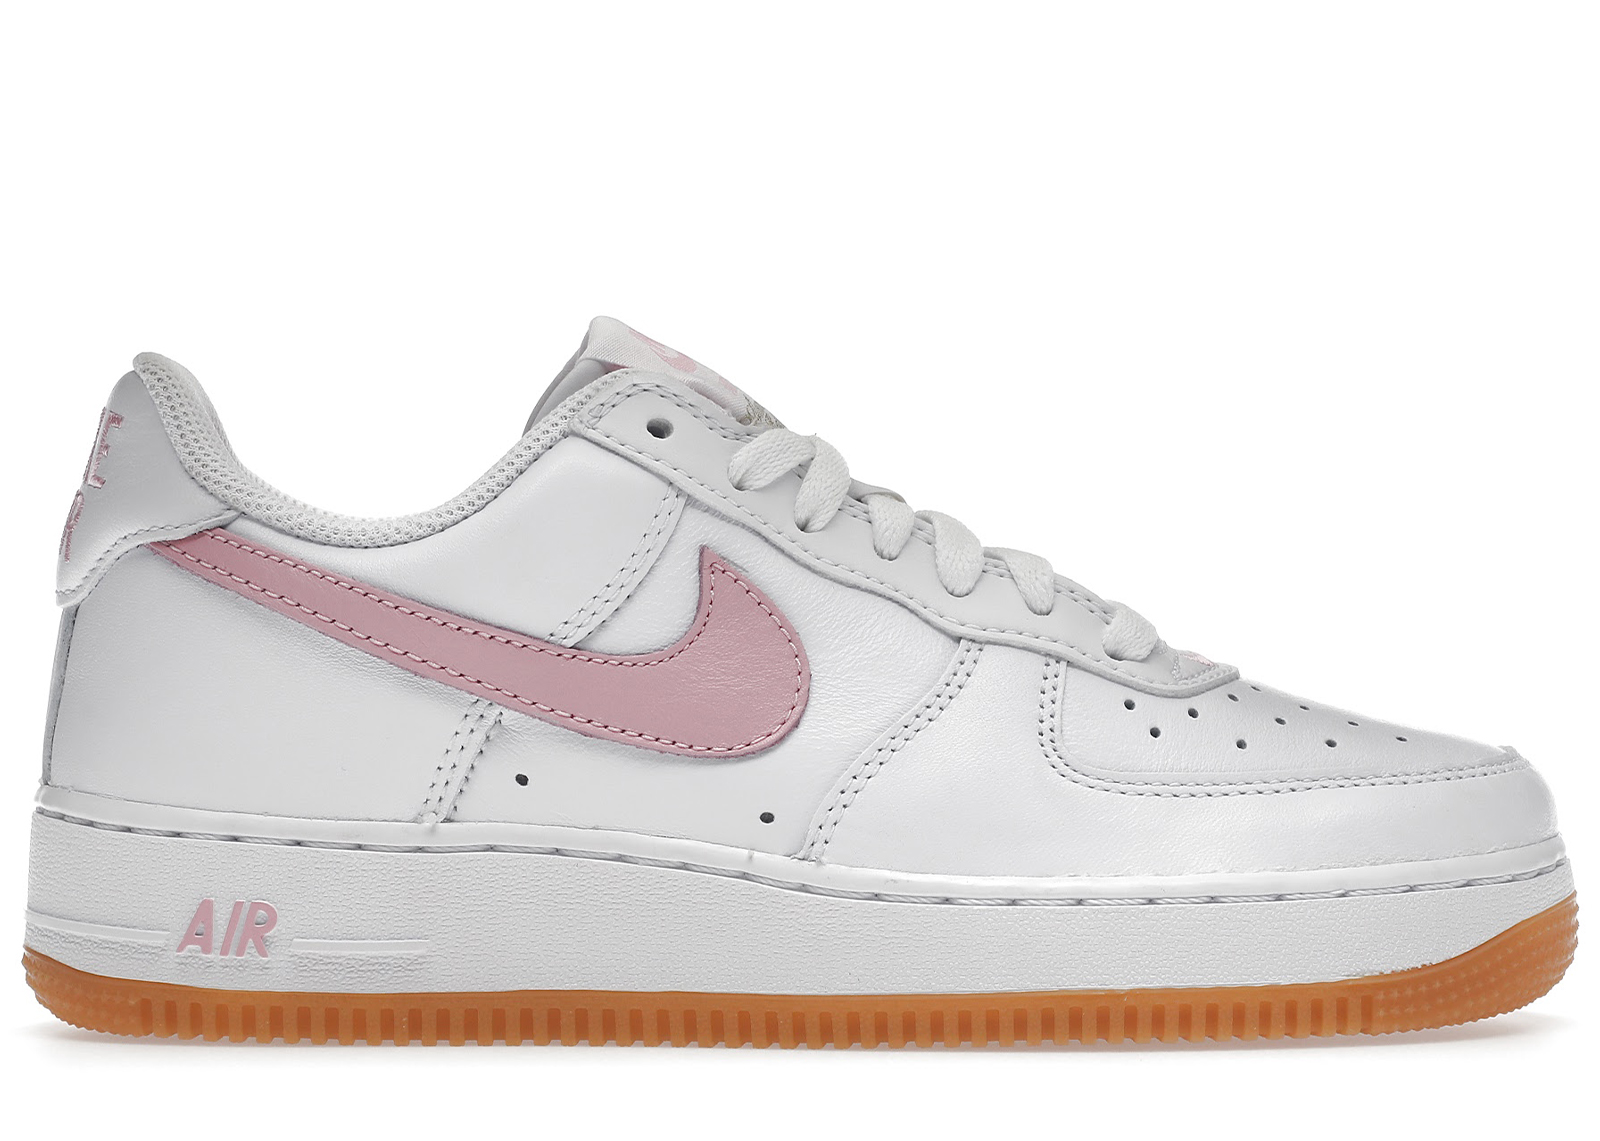 Nike Air Force 1 Low '07 Retro Color of the Month University Blue 